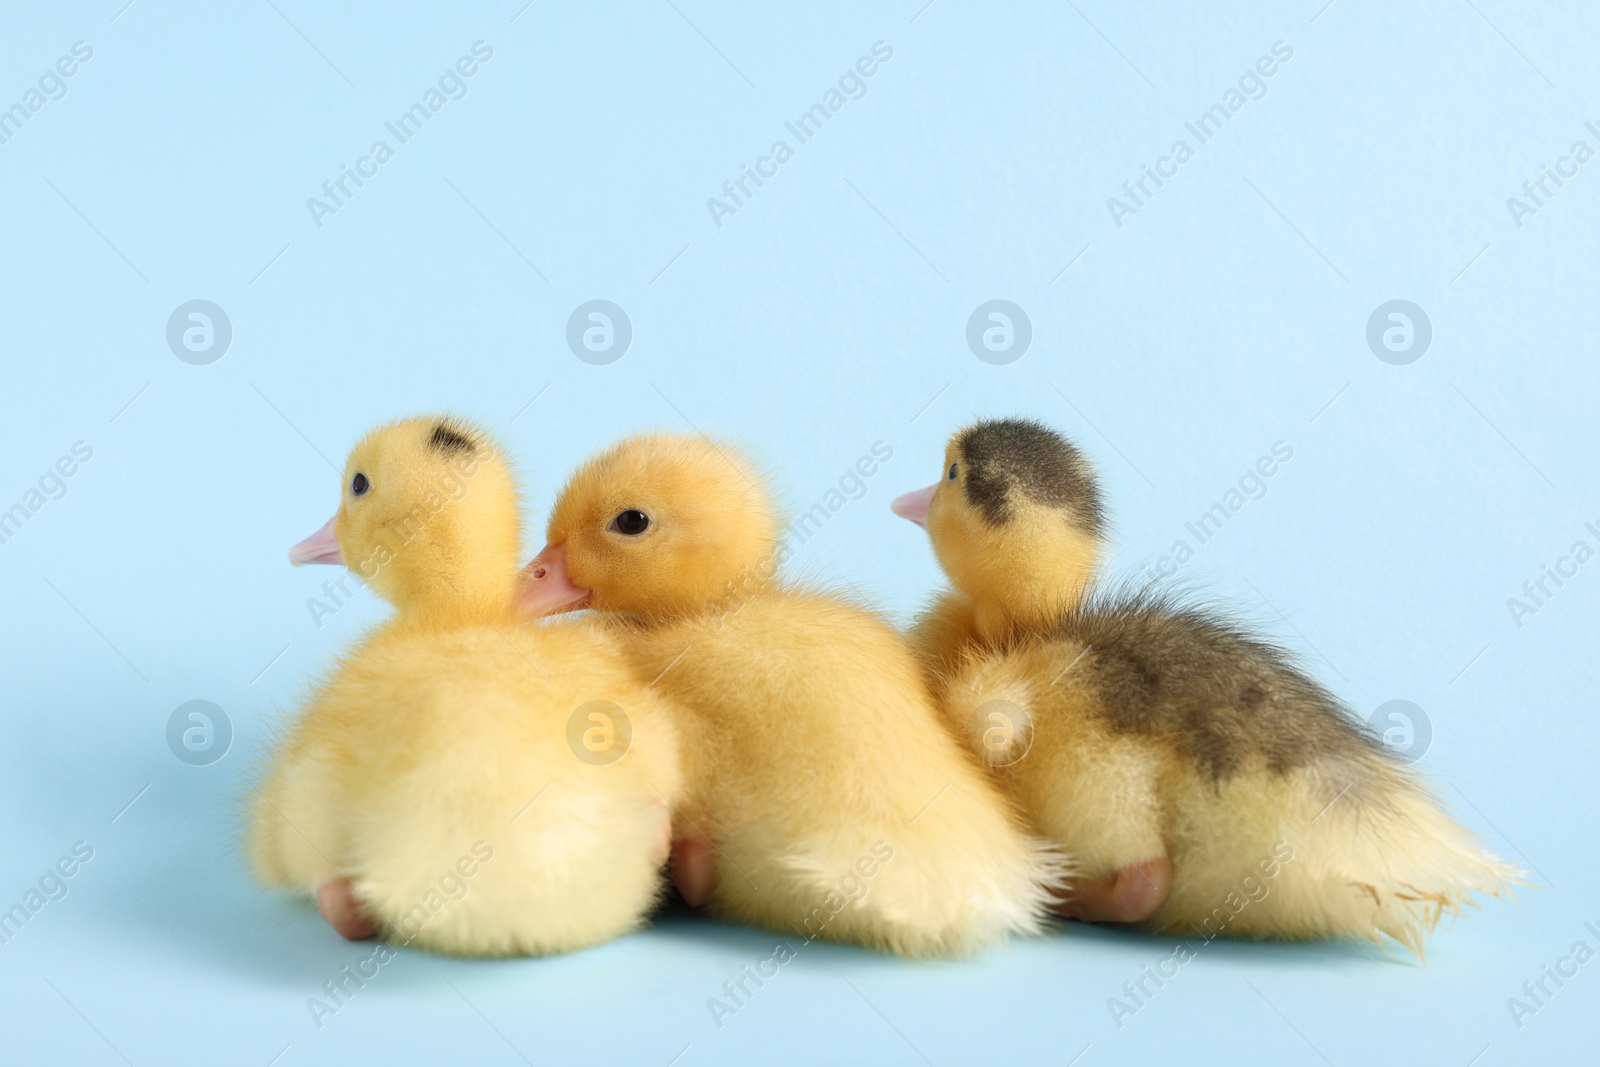 Photo of Baby animals. Cute fluffy ducklings sitting on light blue background